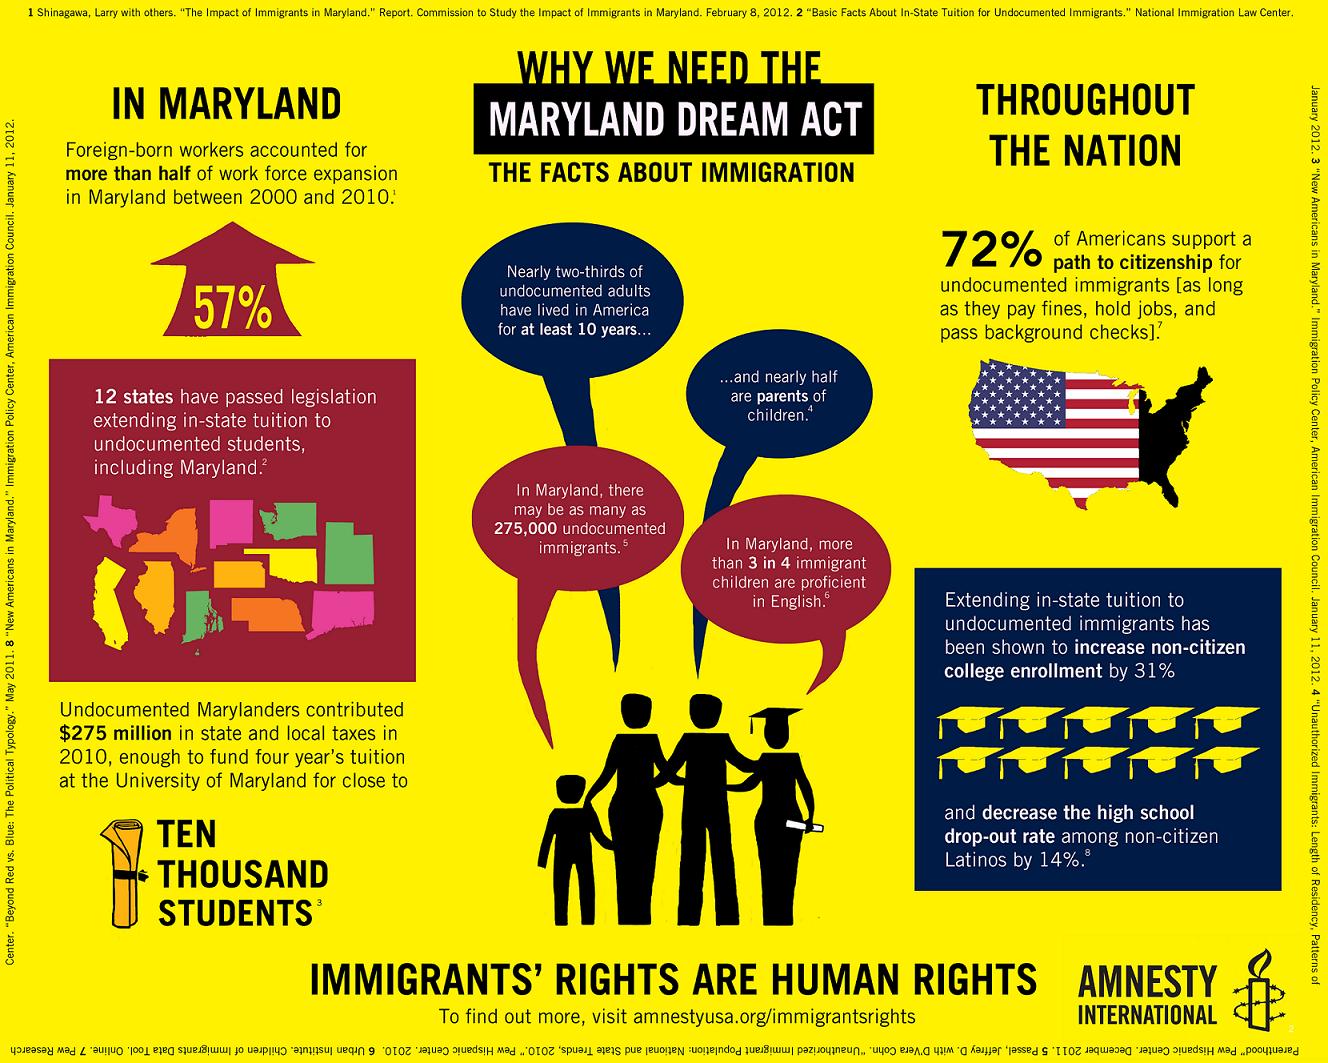 Maryland Dream Act Facts